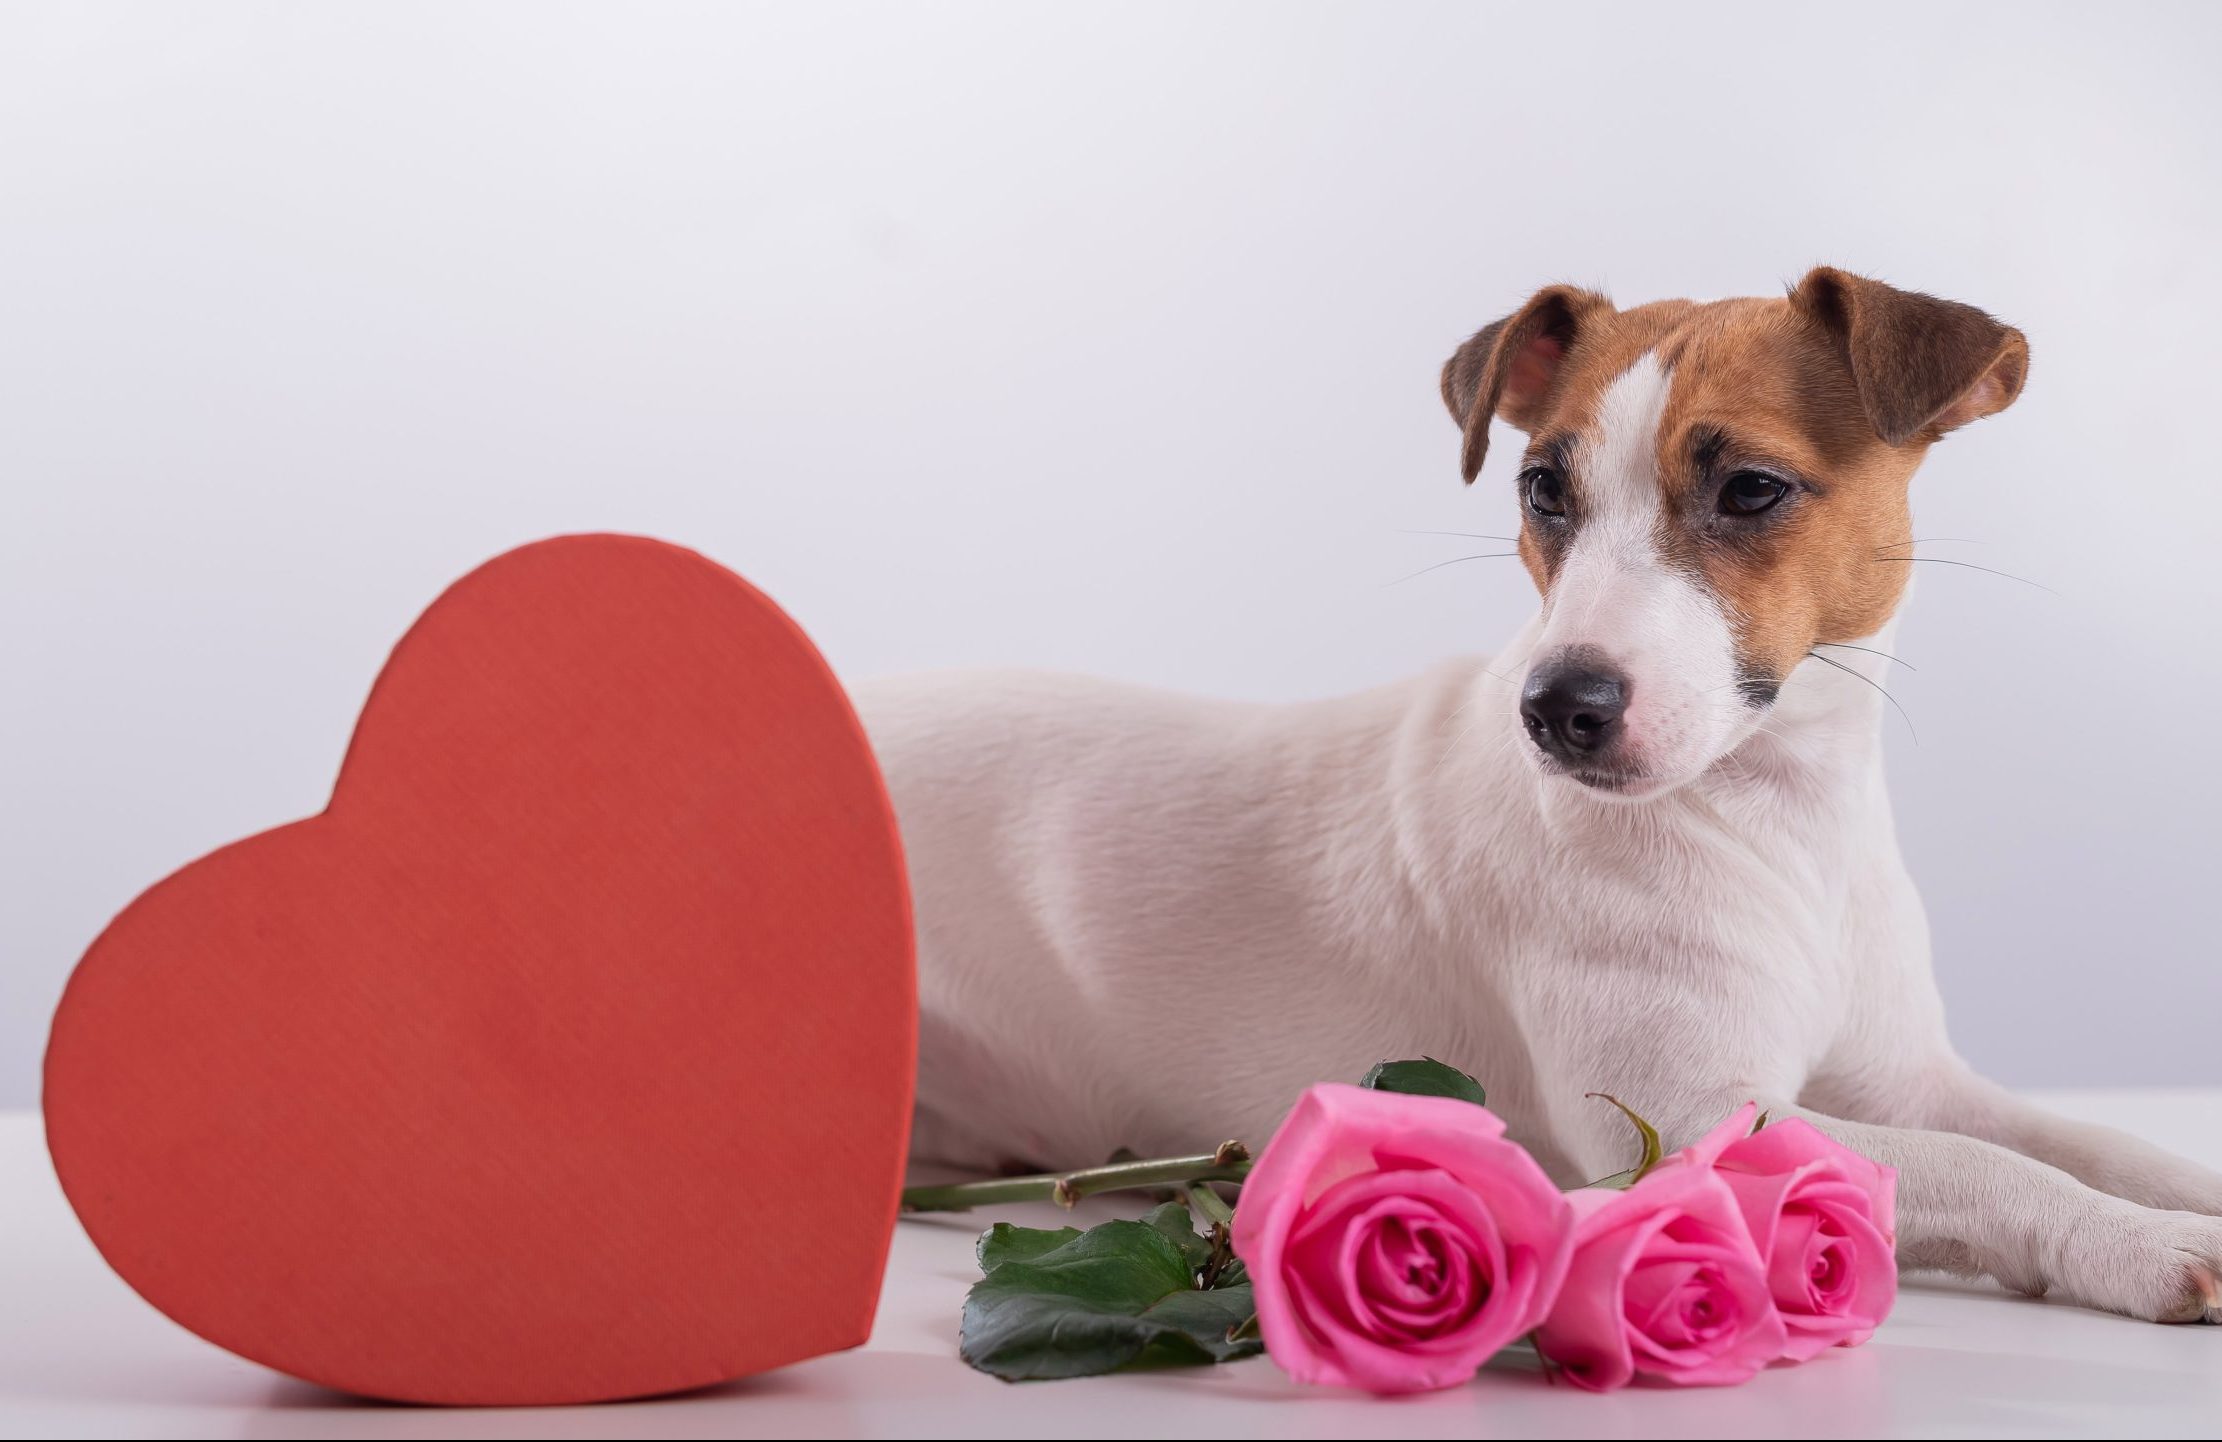 5 Paw-some Valentine’s Day Date Ideas for You & Your Pet